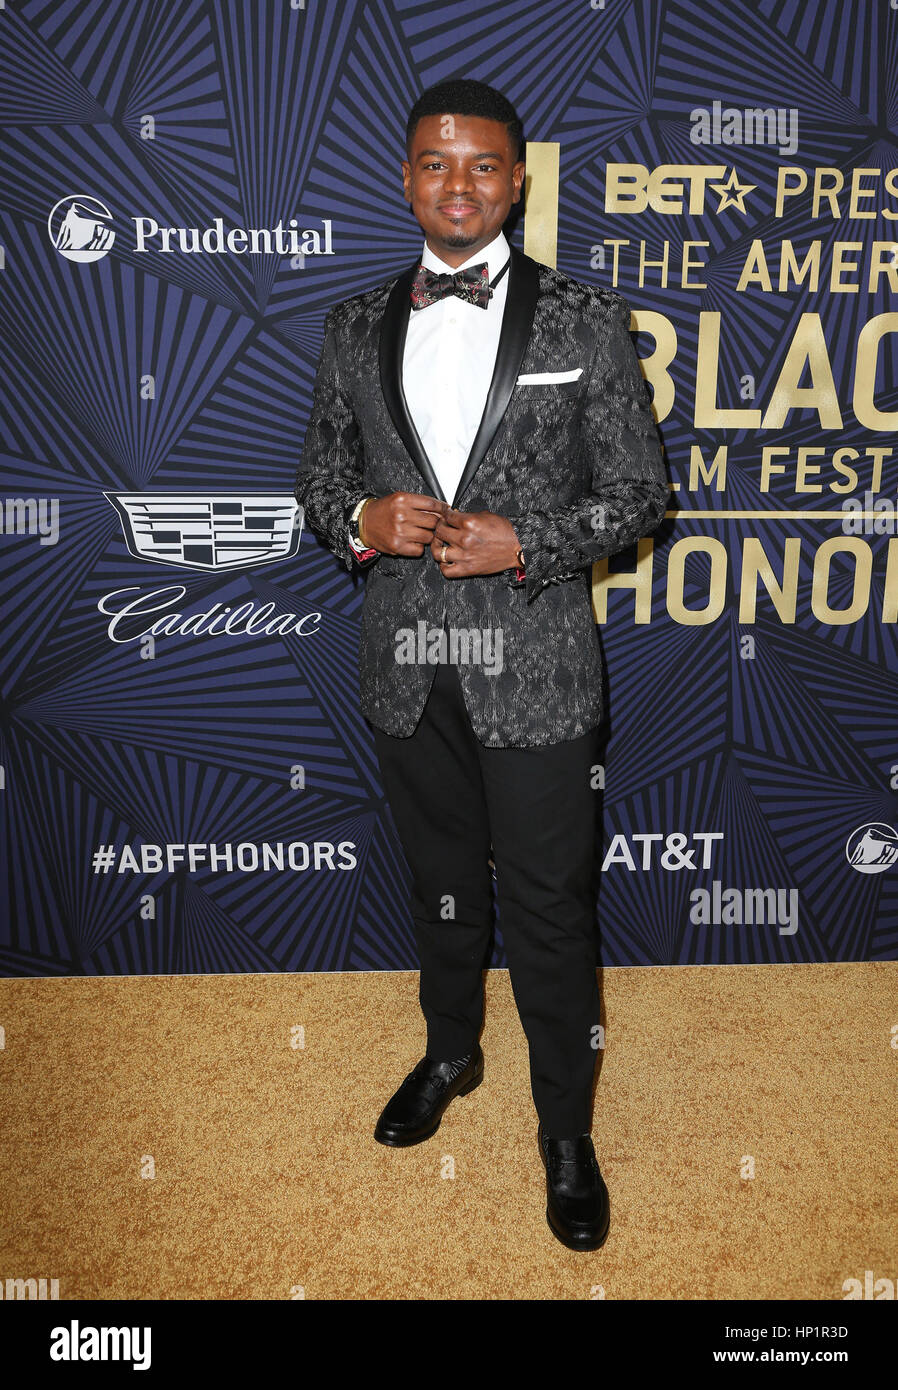 Beverly Hills, CA. 17th Feb, 2017. Jamal Mallory-McCree, At BET's 2017 American Black Film Festival Honors Awards, At The Beverly Hilton Hotel In California on February 17, 2017. Credit: Faye Sadou/Media Punch/Alamy Live News Credit: MediaPunch Inc/Alamy Live News Stock Photo